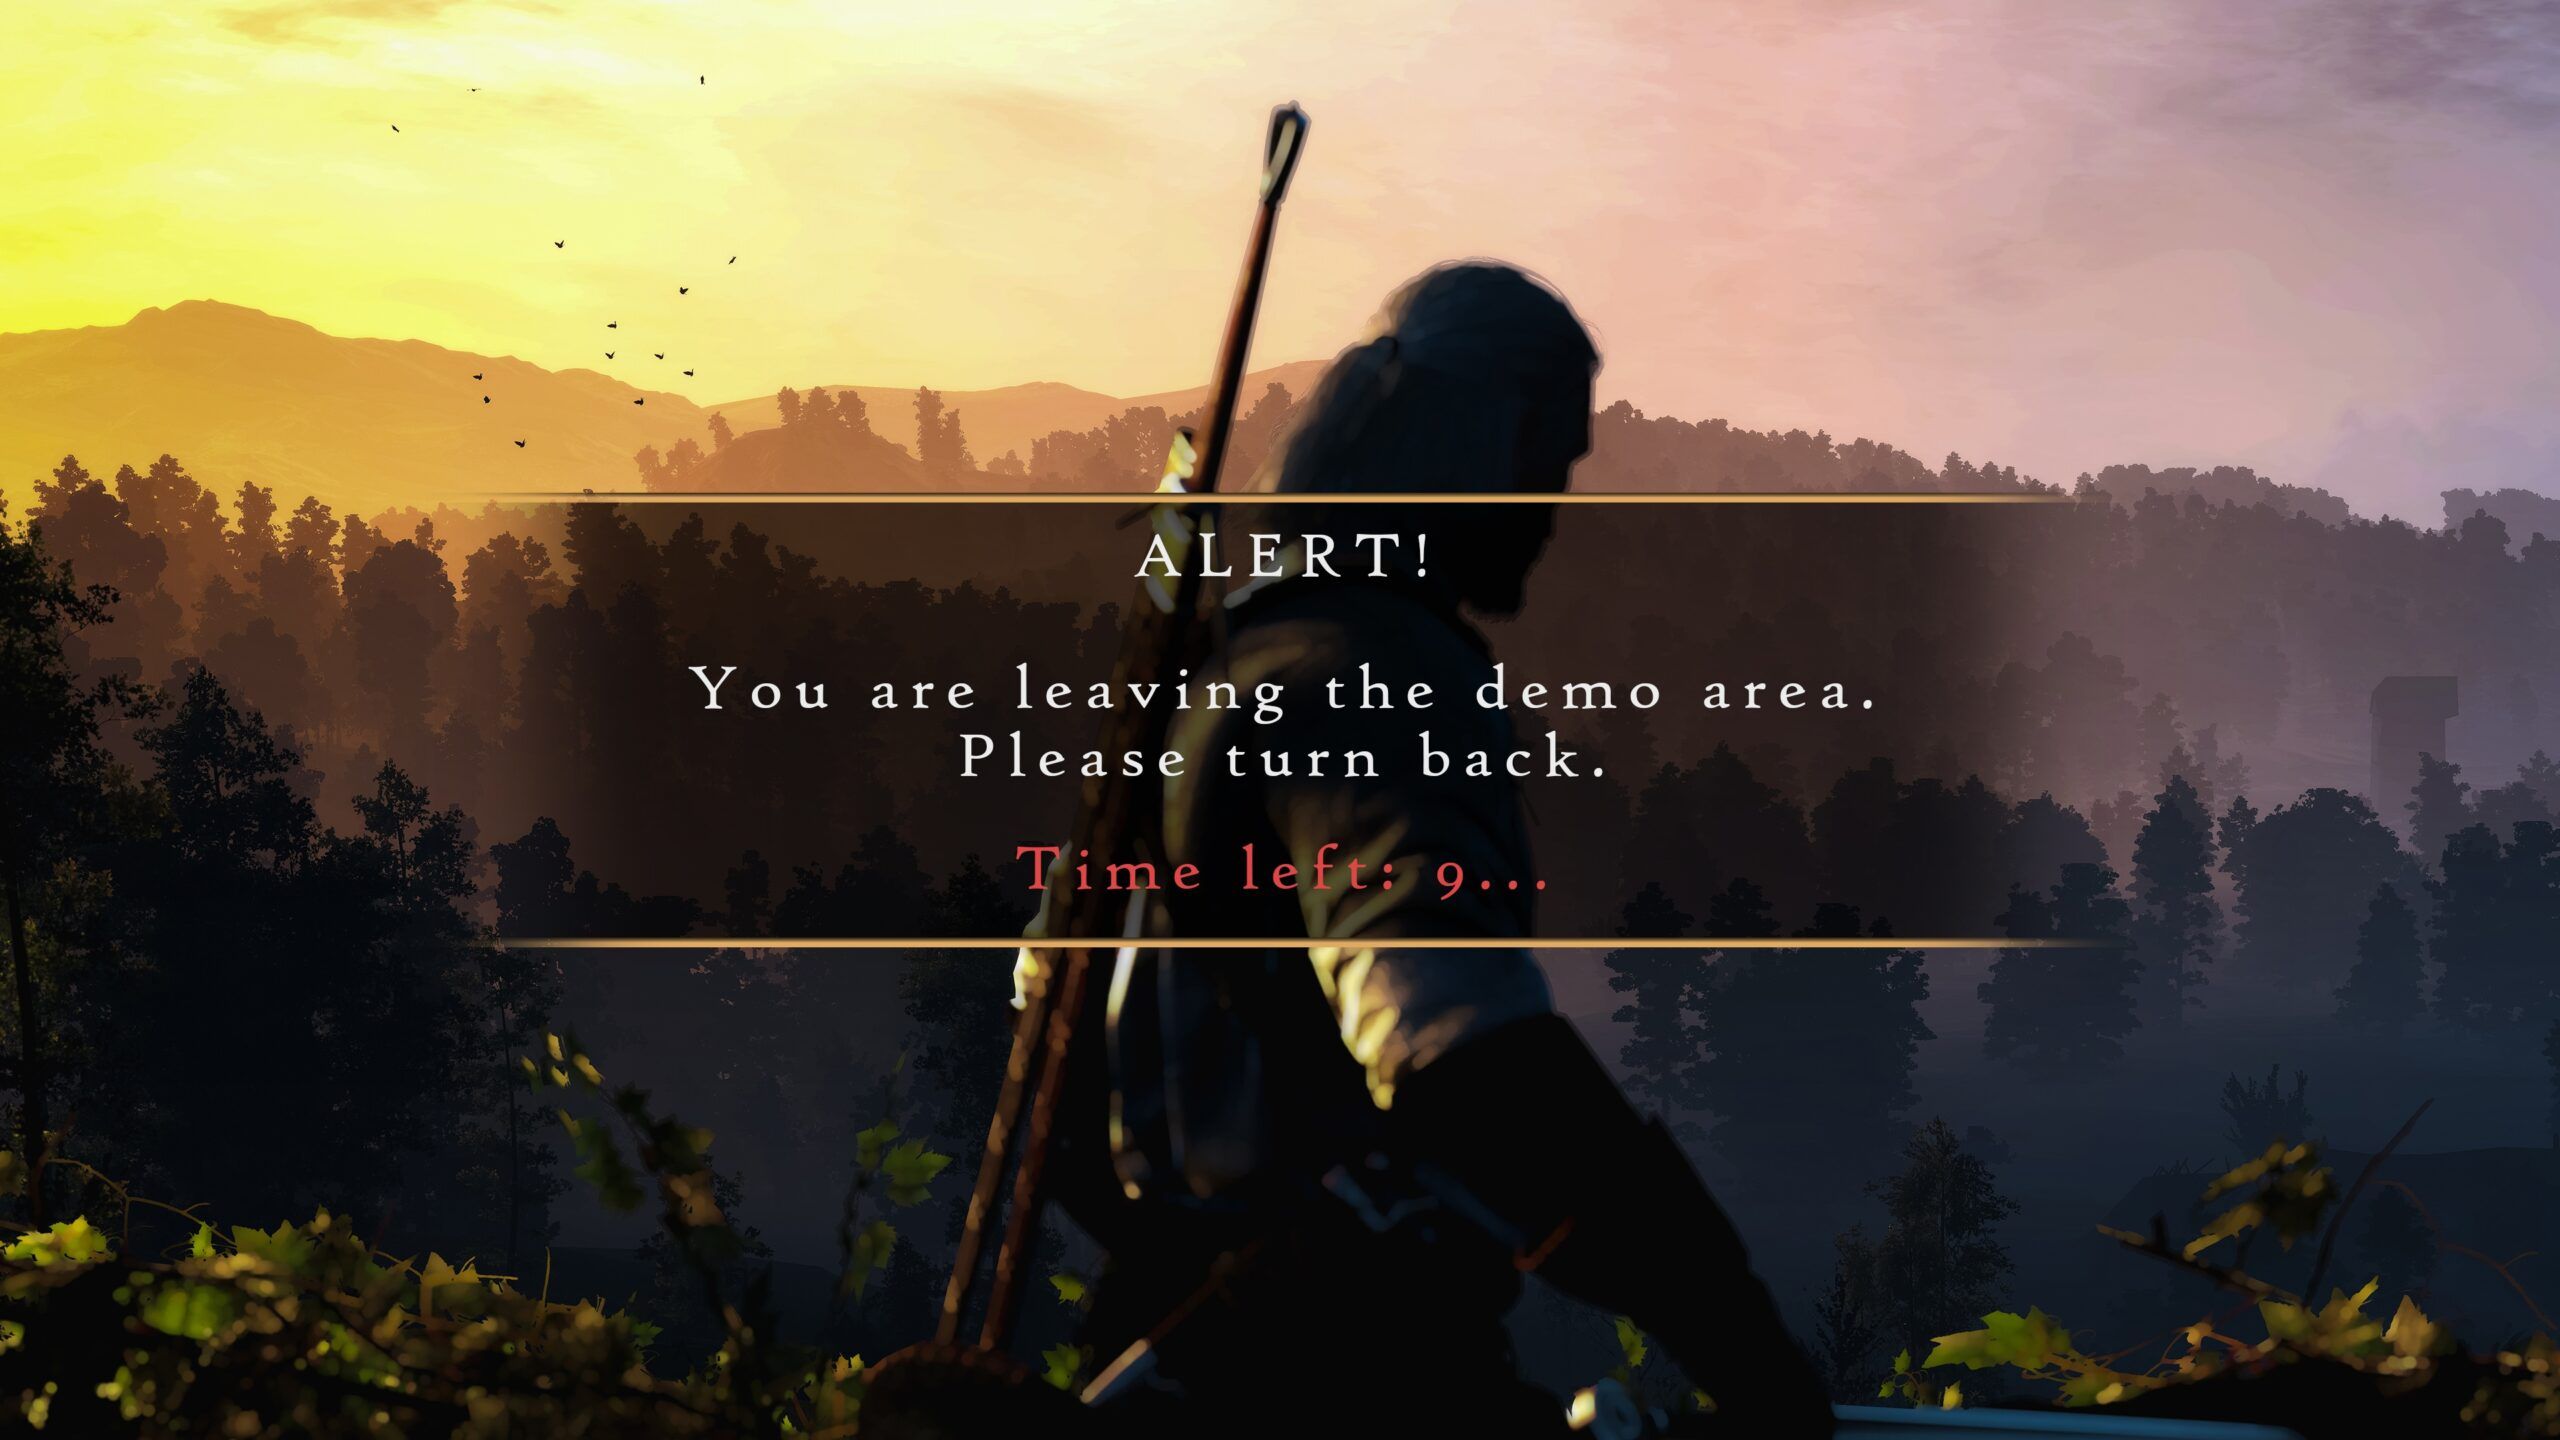 Game Demos featured image - Witcher 3 background with fictional text saying to turn back and go back into the demo area.